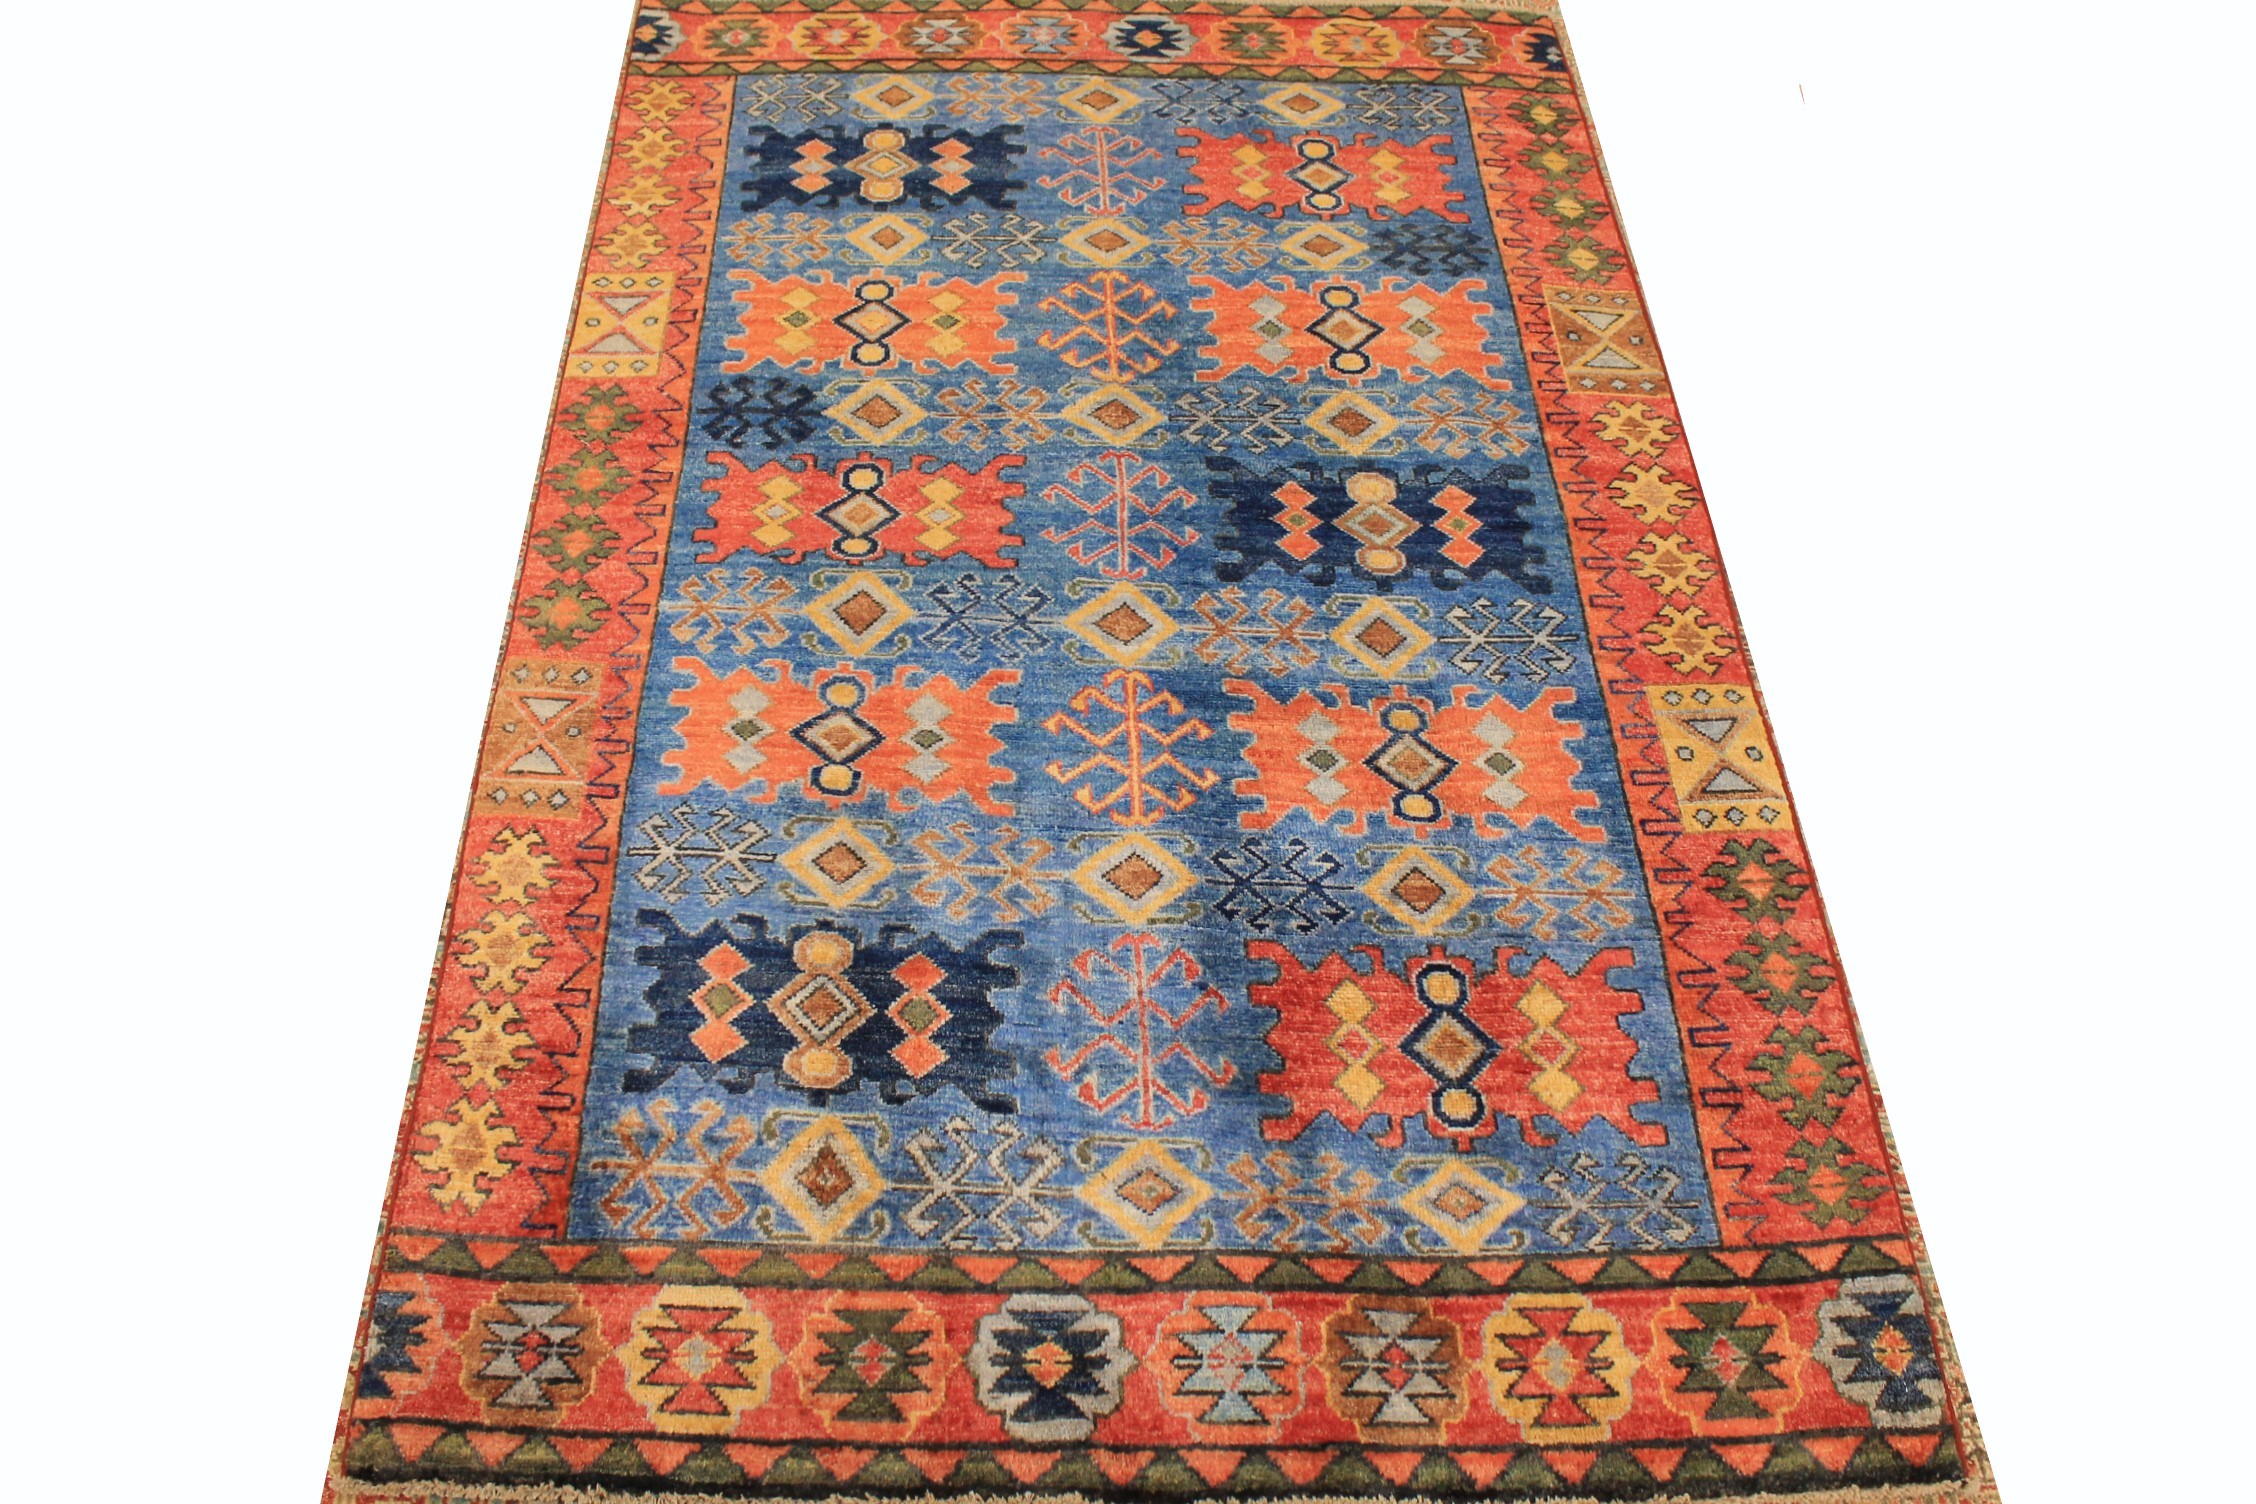 4x6 Aryana & Antique Revivals Hand Knotted  Area Rug - MR026672